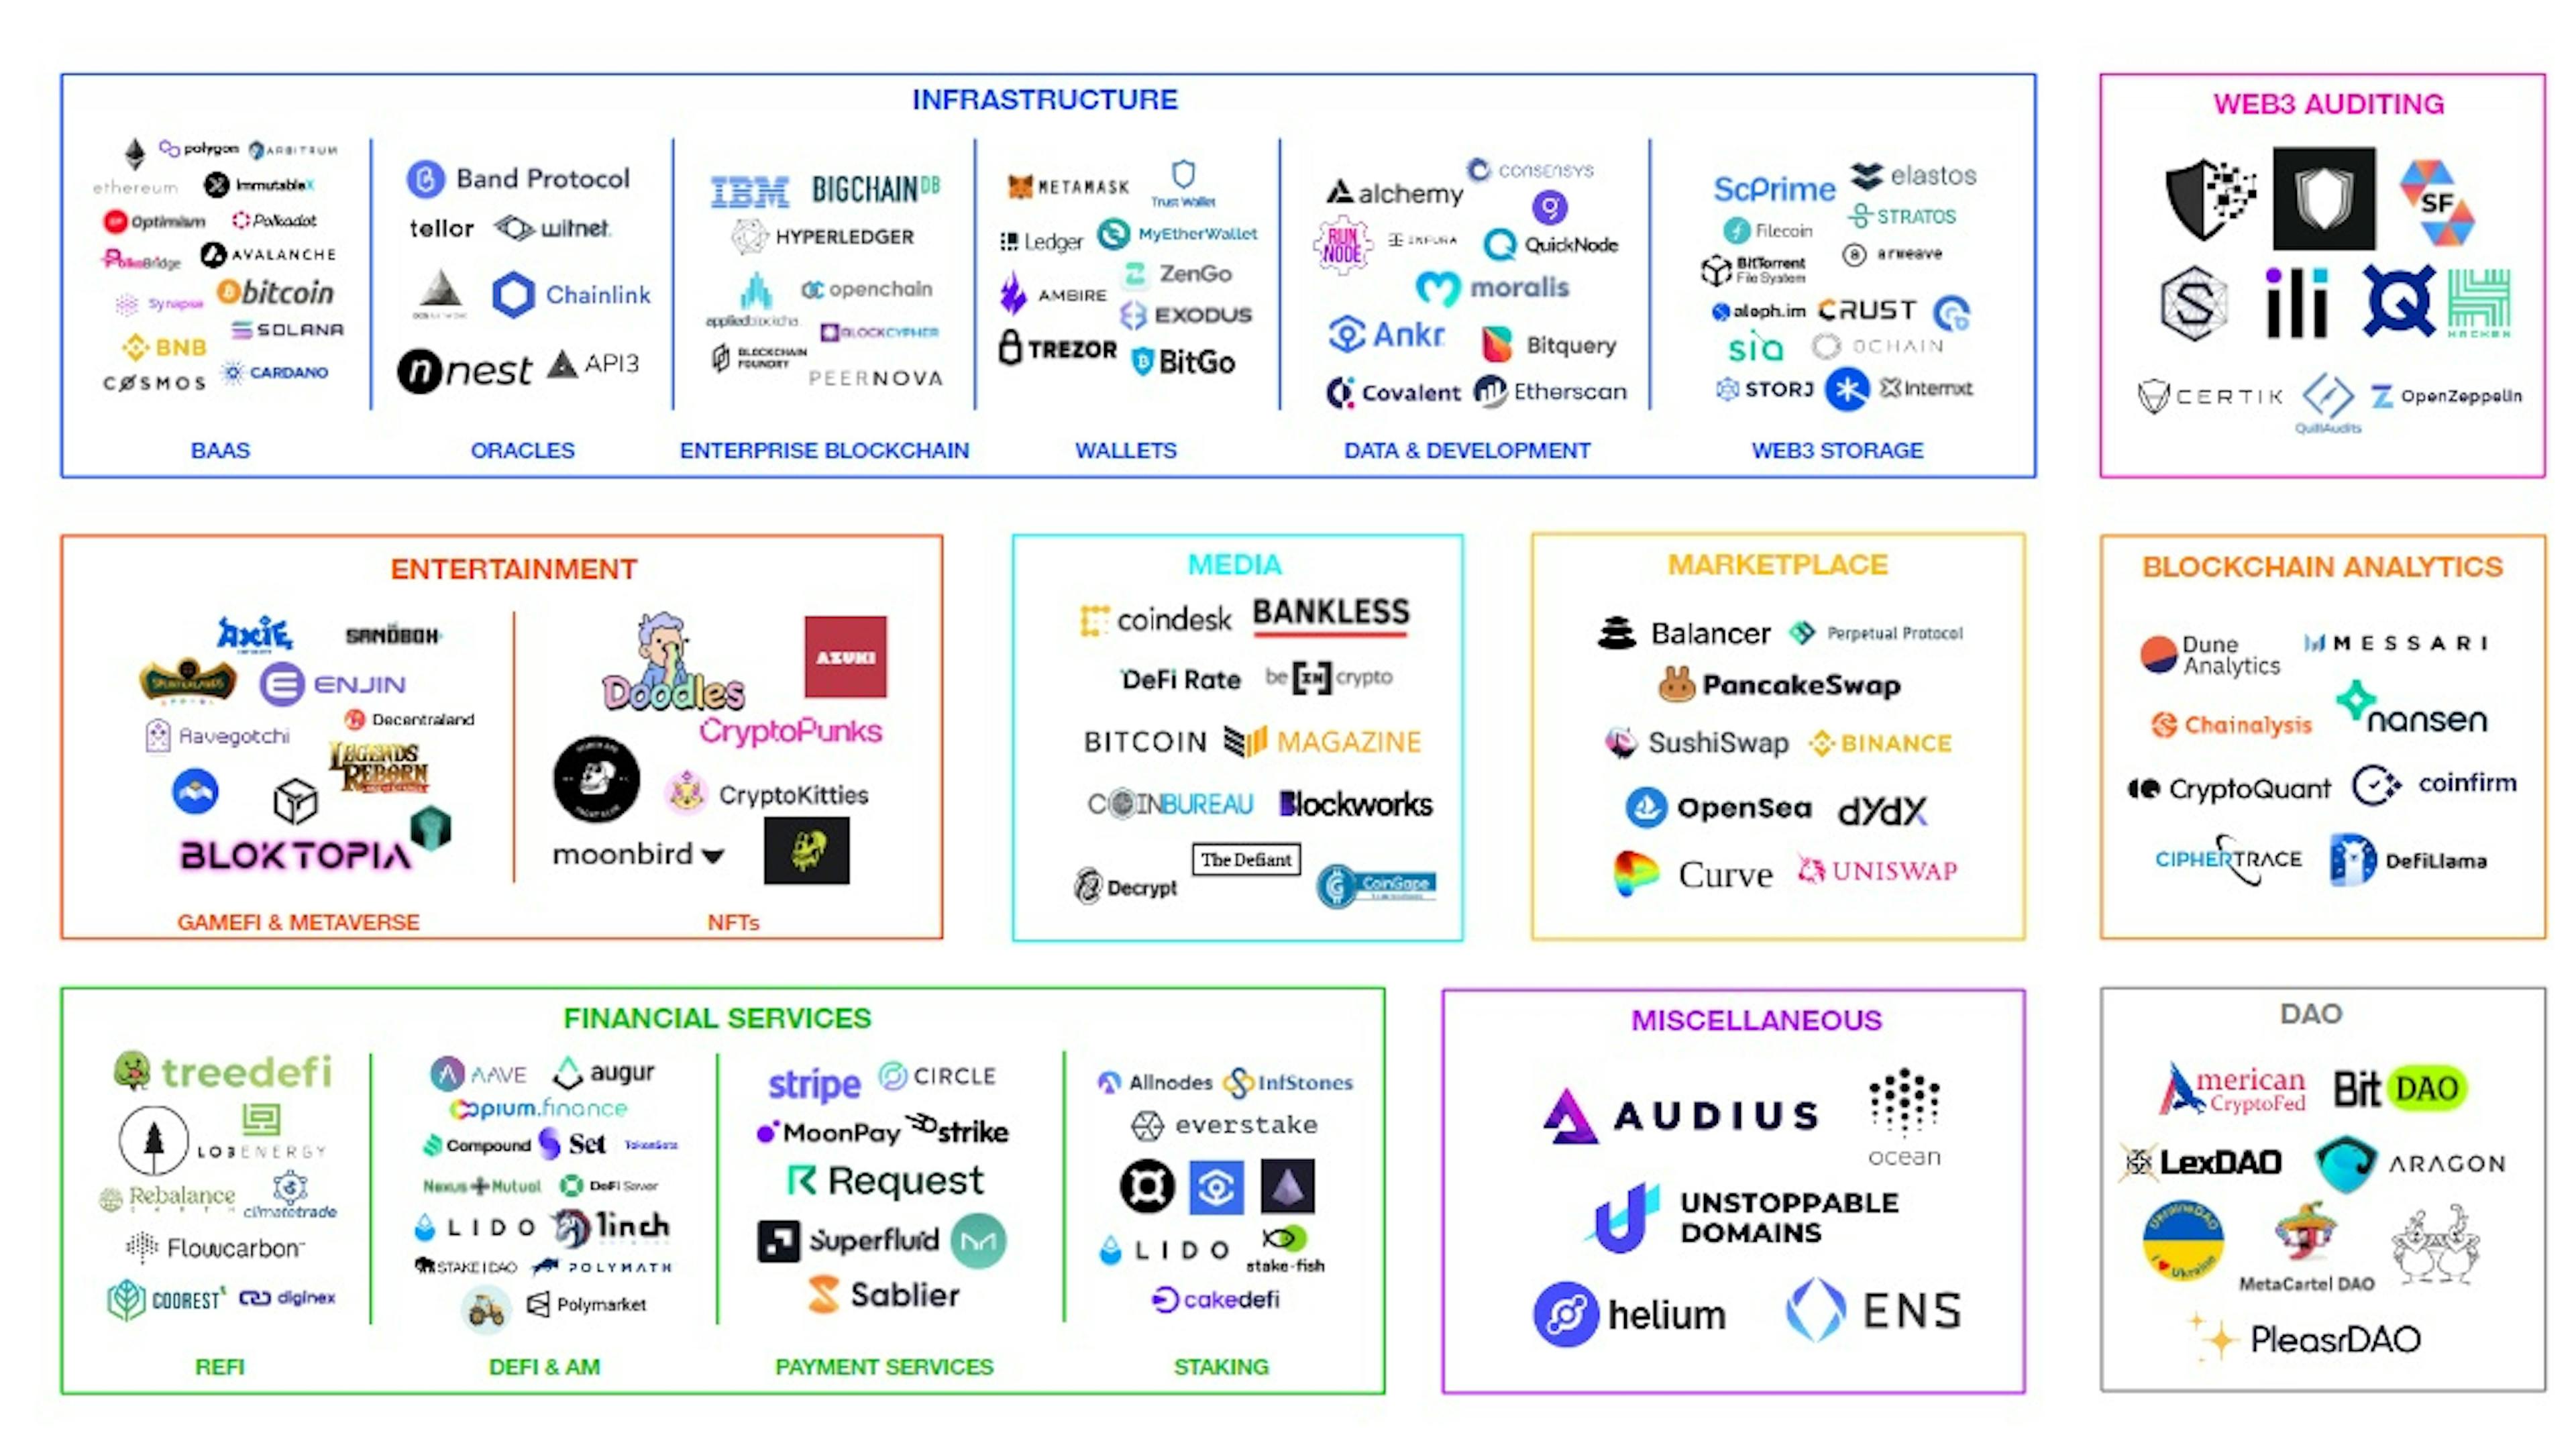 The most common business models in the Web3 space. Source: https://blockchain-founders.io/educational-resources-for-entrepreneurs/the-predominant-web3-business-models-and-their-key-metrics